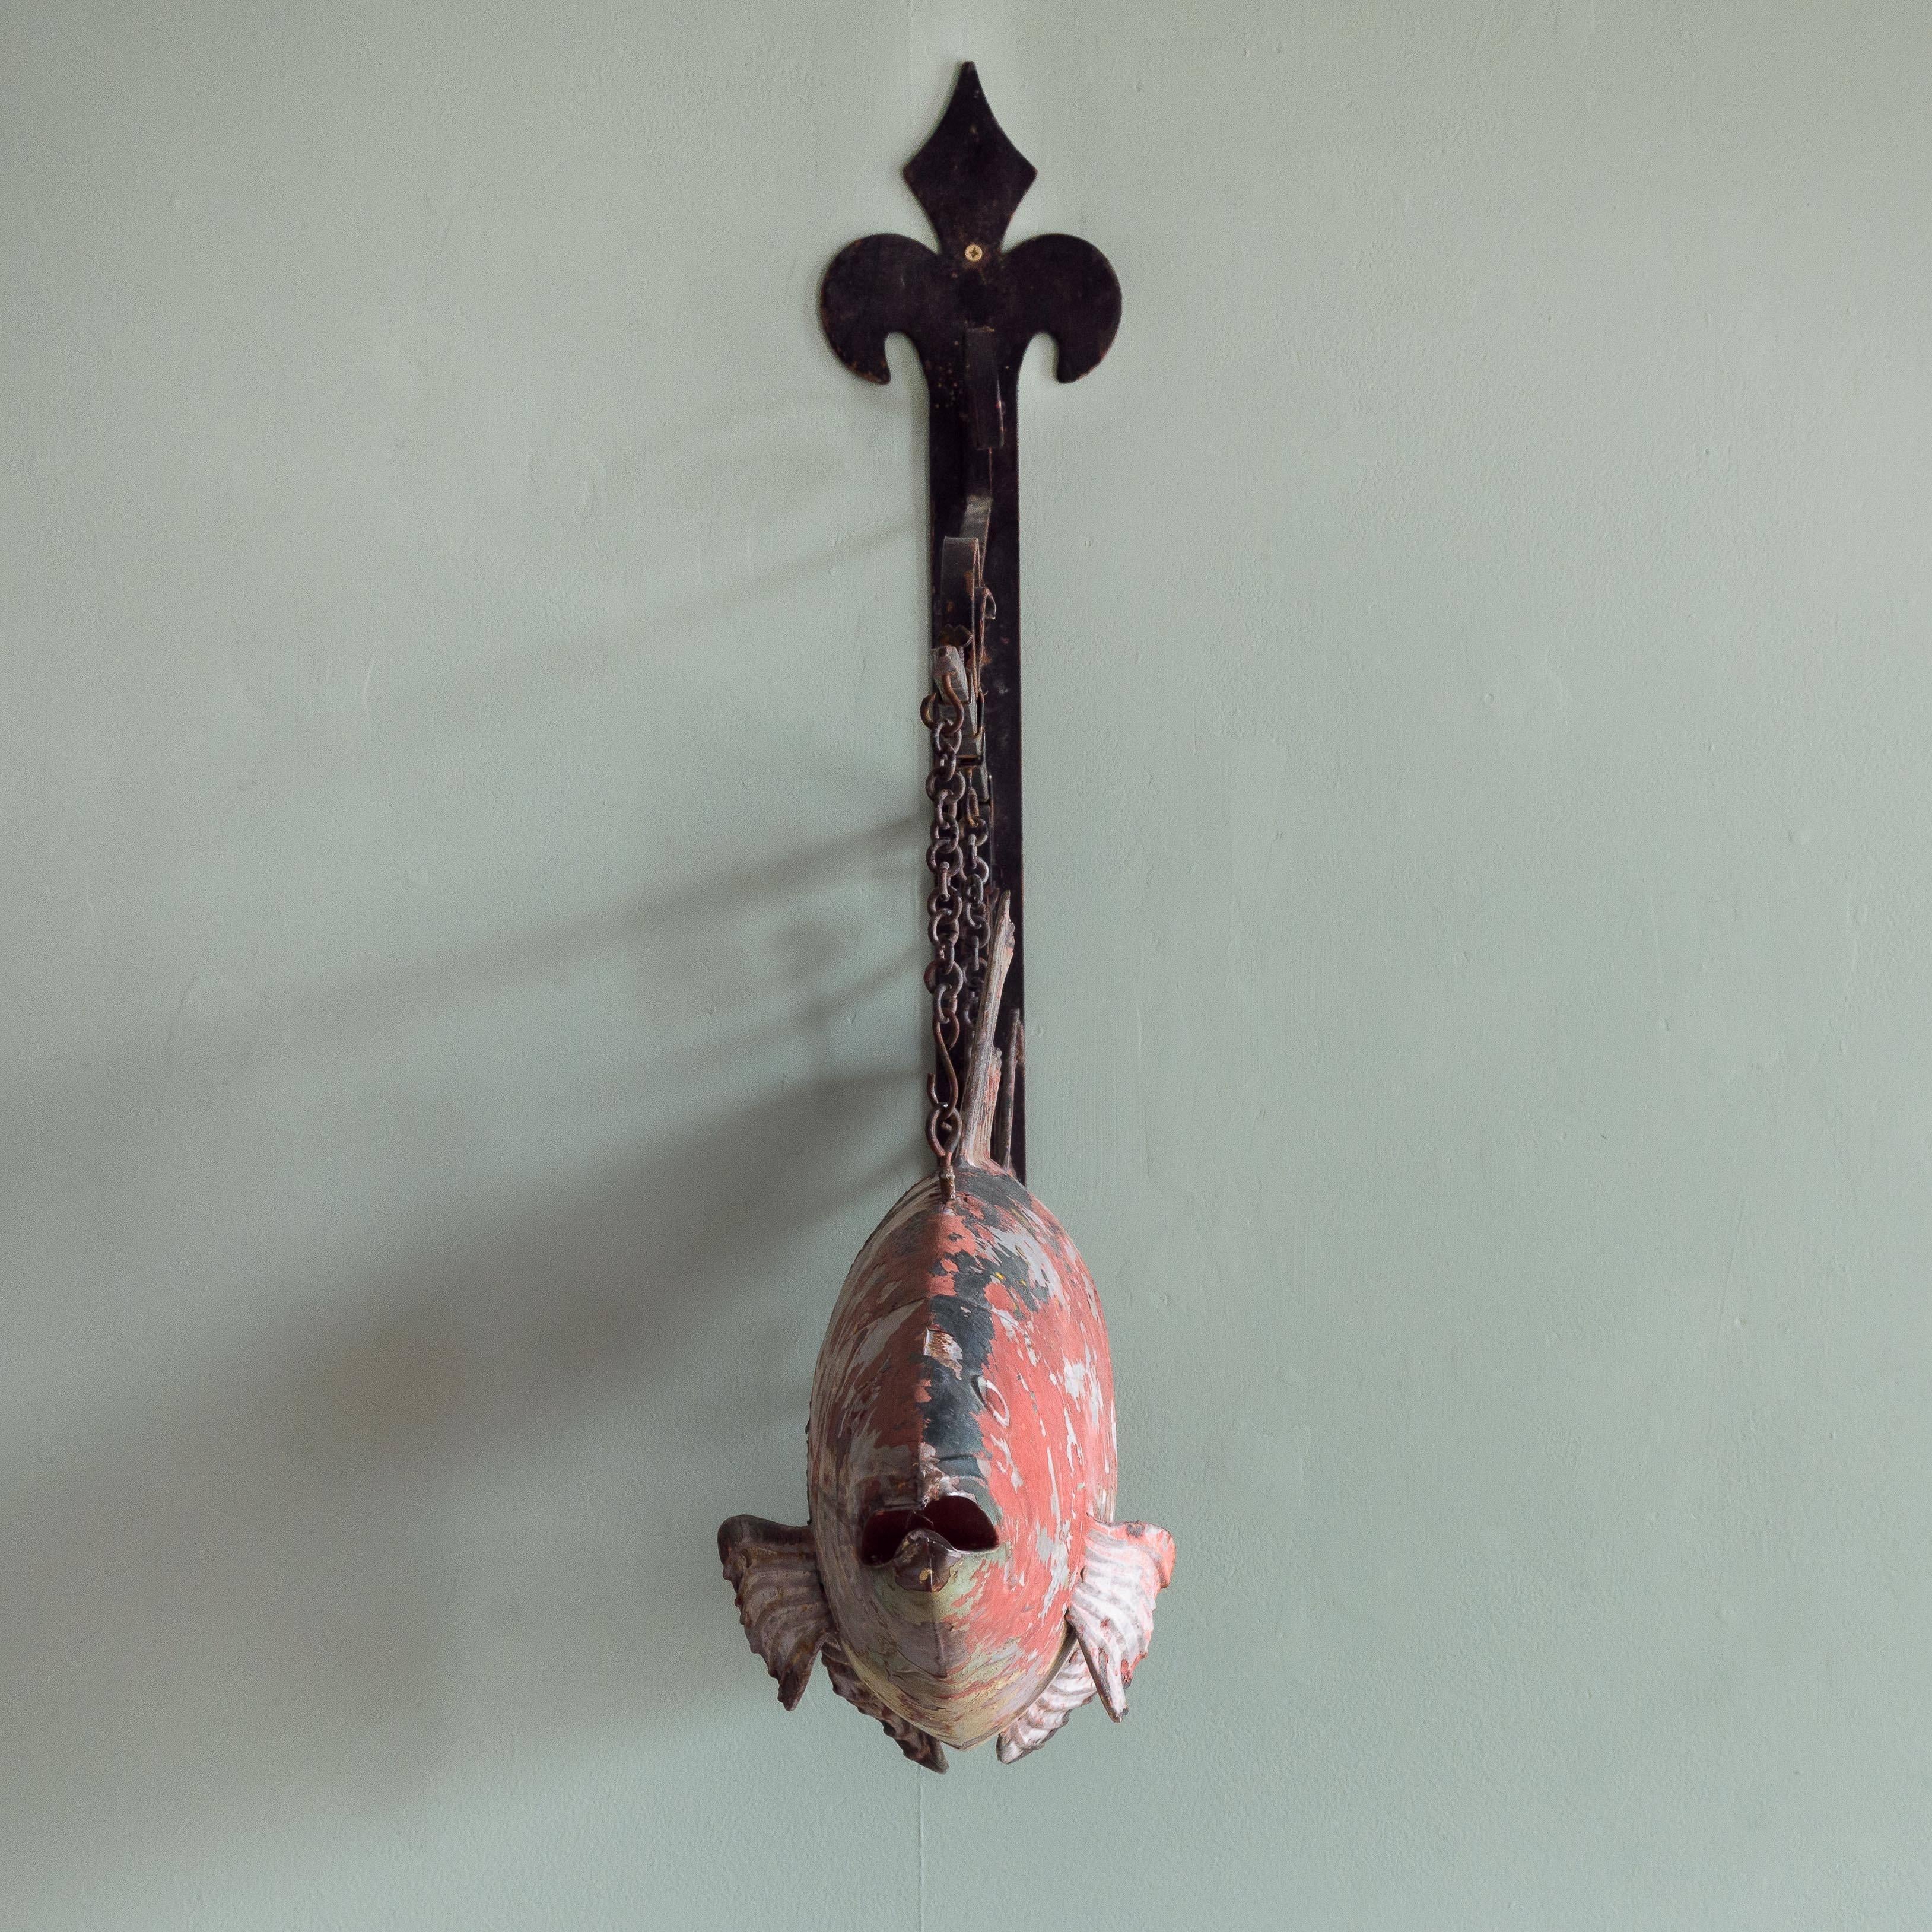 An English tackle shop trade sign, the suspended fish hung from wrought iron wall bracket, the fish with traces of polychrome paintwork, circa 1940-1950.